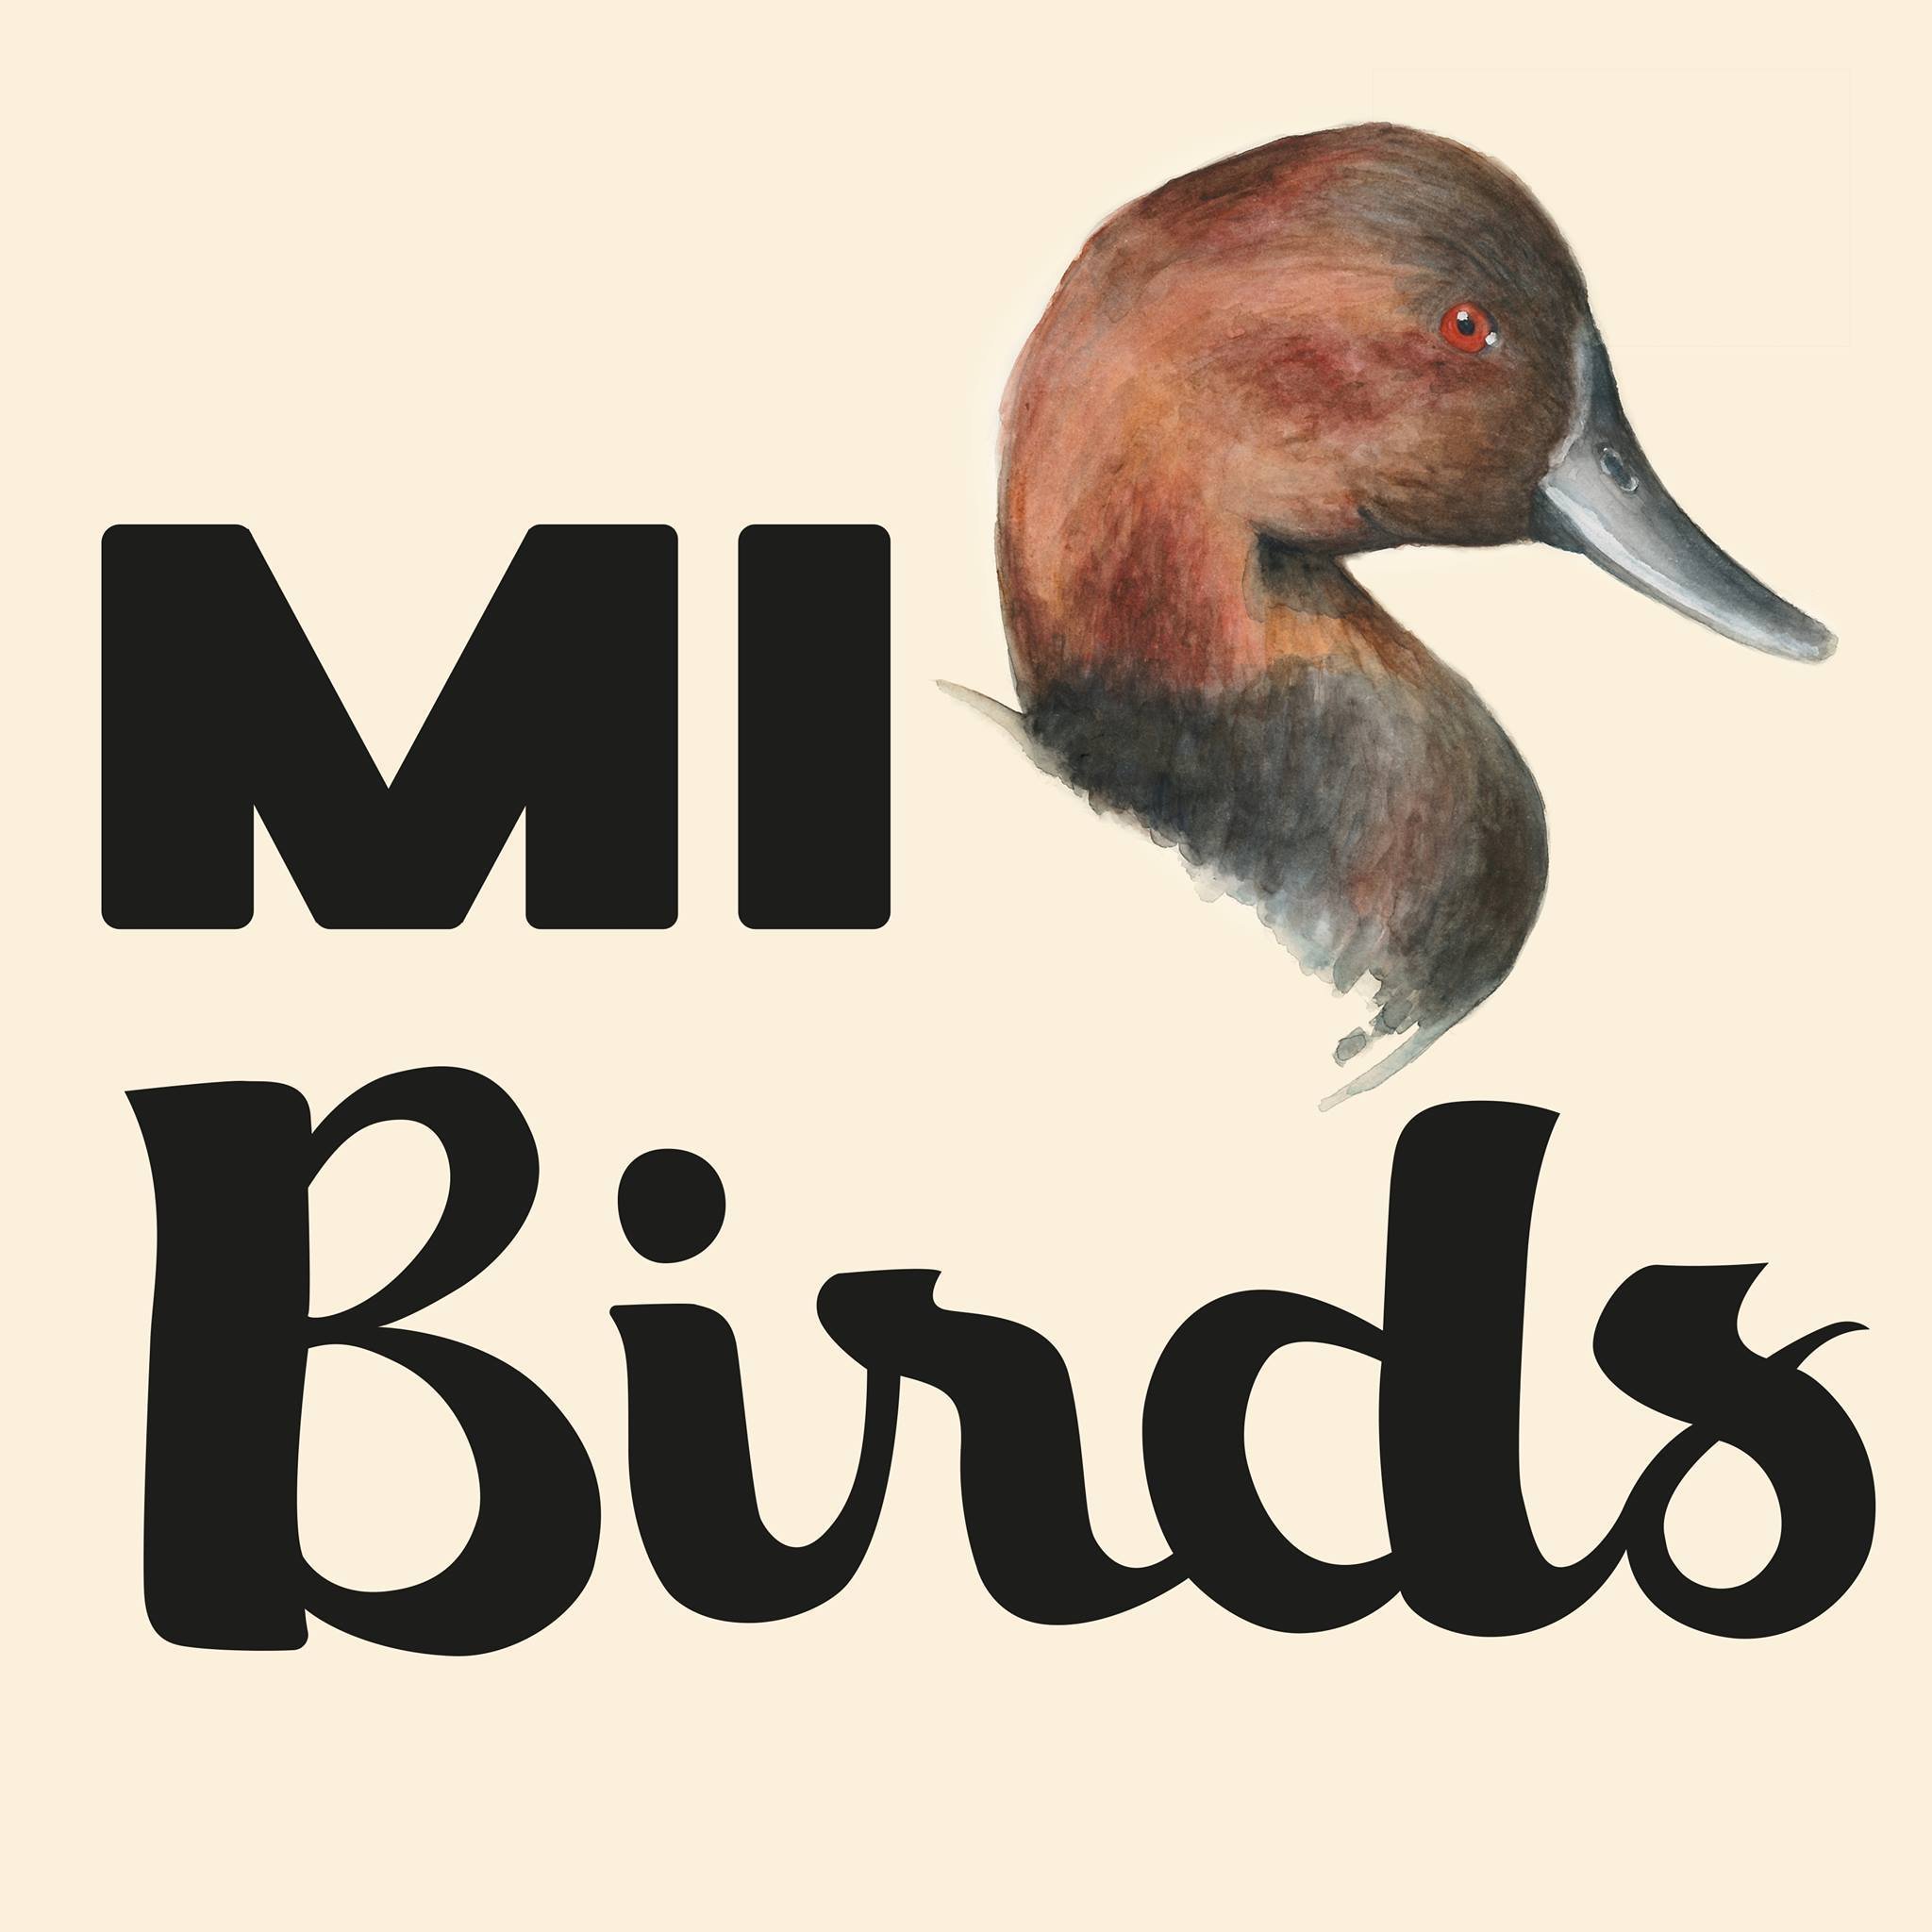 Aims to increase all Michiganders' engagement in the understanding, care, and stewardship of #publiclands that are important for #birds and people.